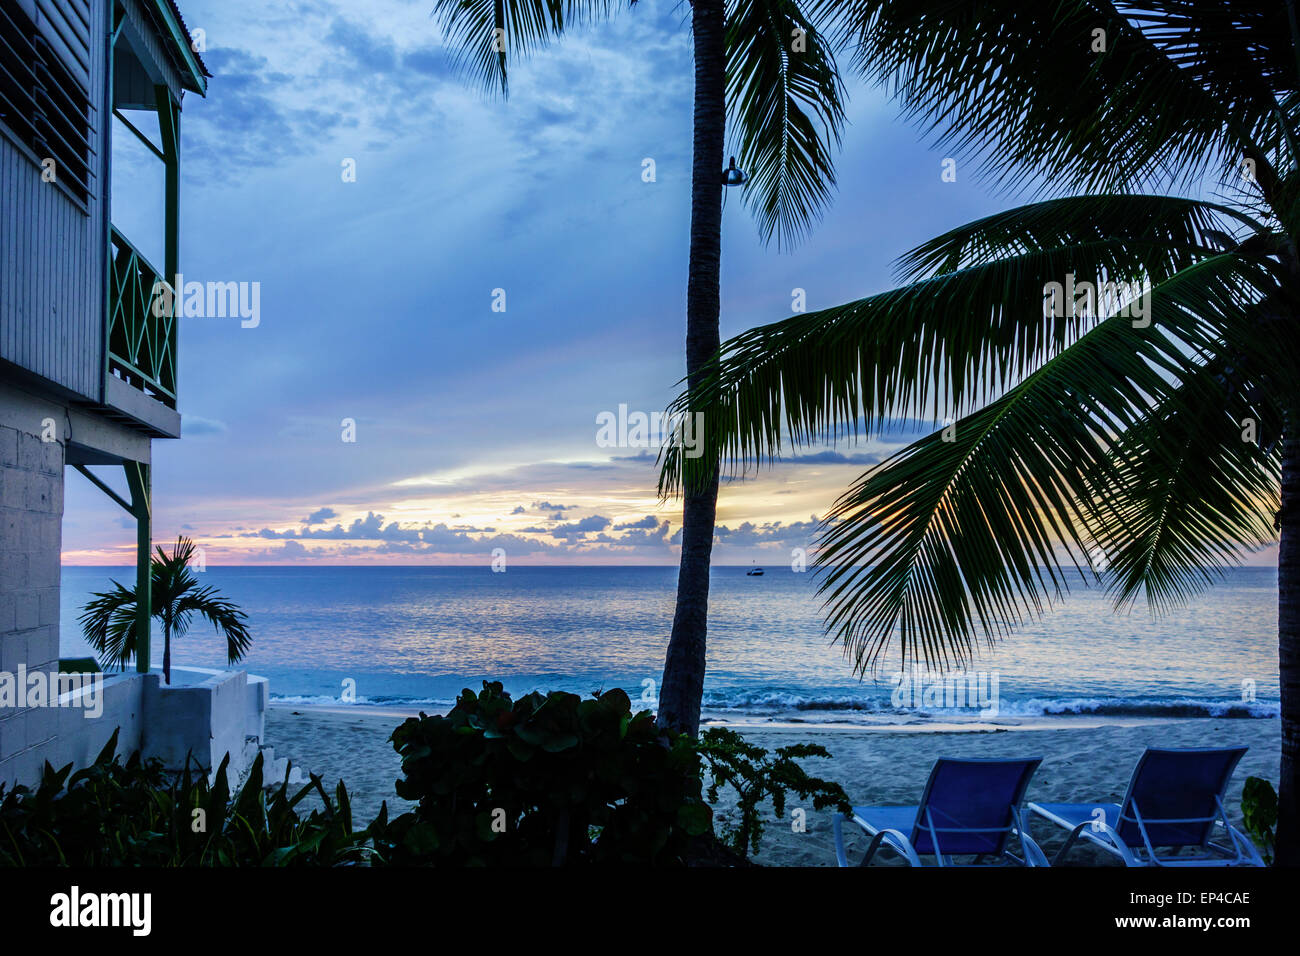 The view from Cottages By the Sea resort on the west end of St. Croix, U.S. Virgin Islands at sunset. Stock Photo